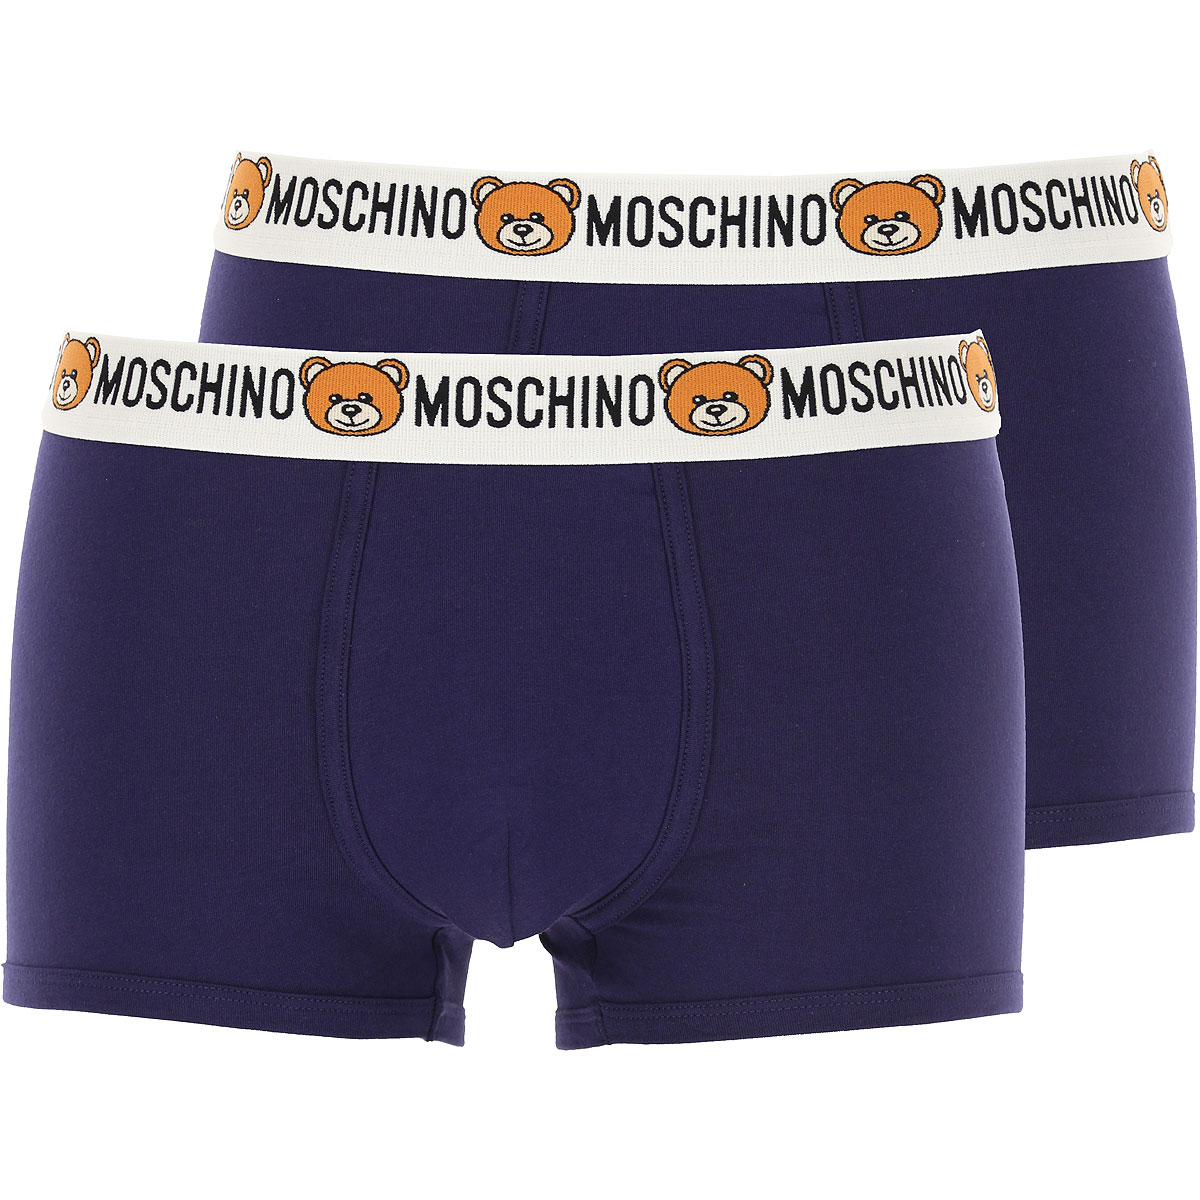 Mens Underwear Moschino, Style code: a4770_a1-8119_a1-0290